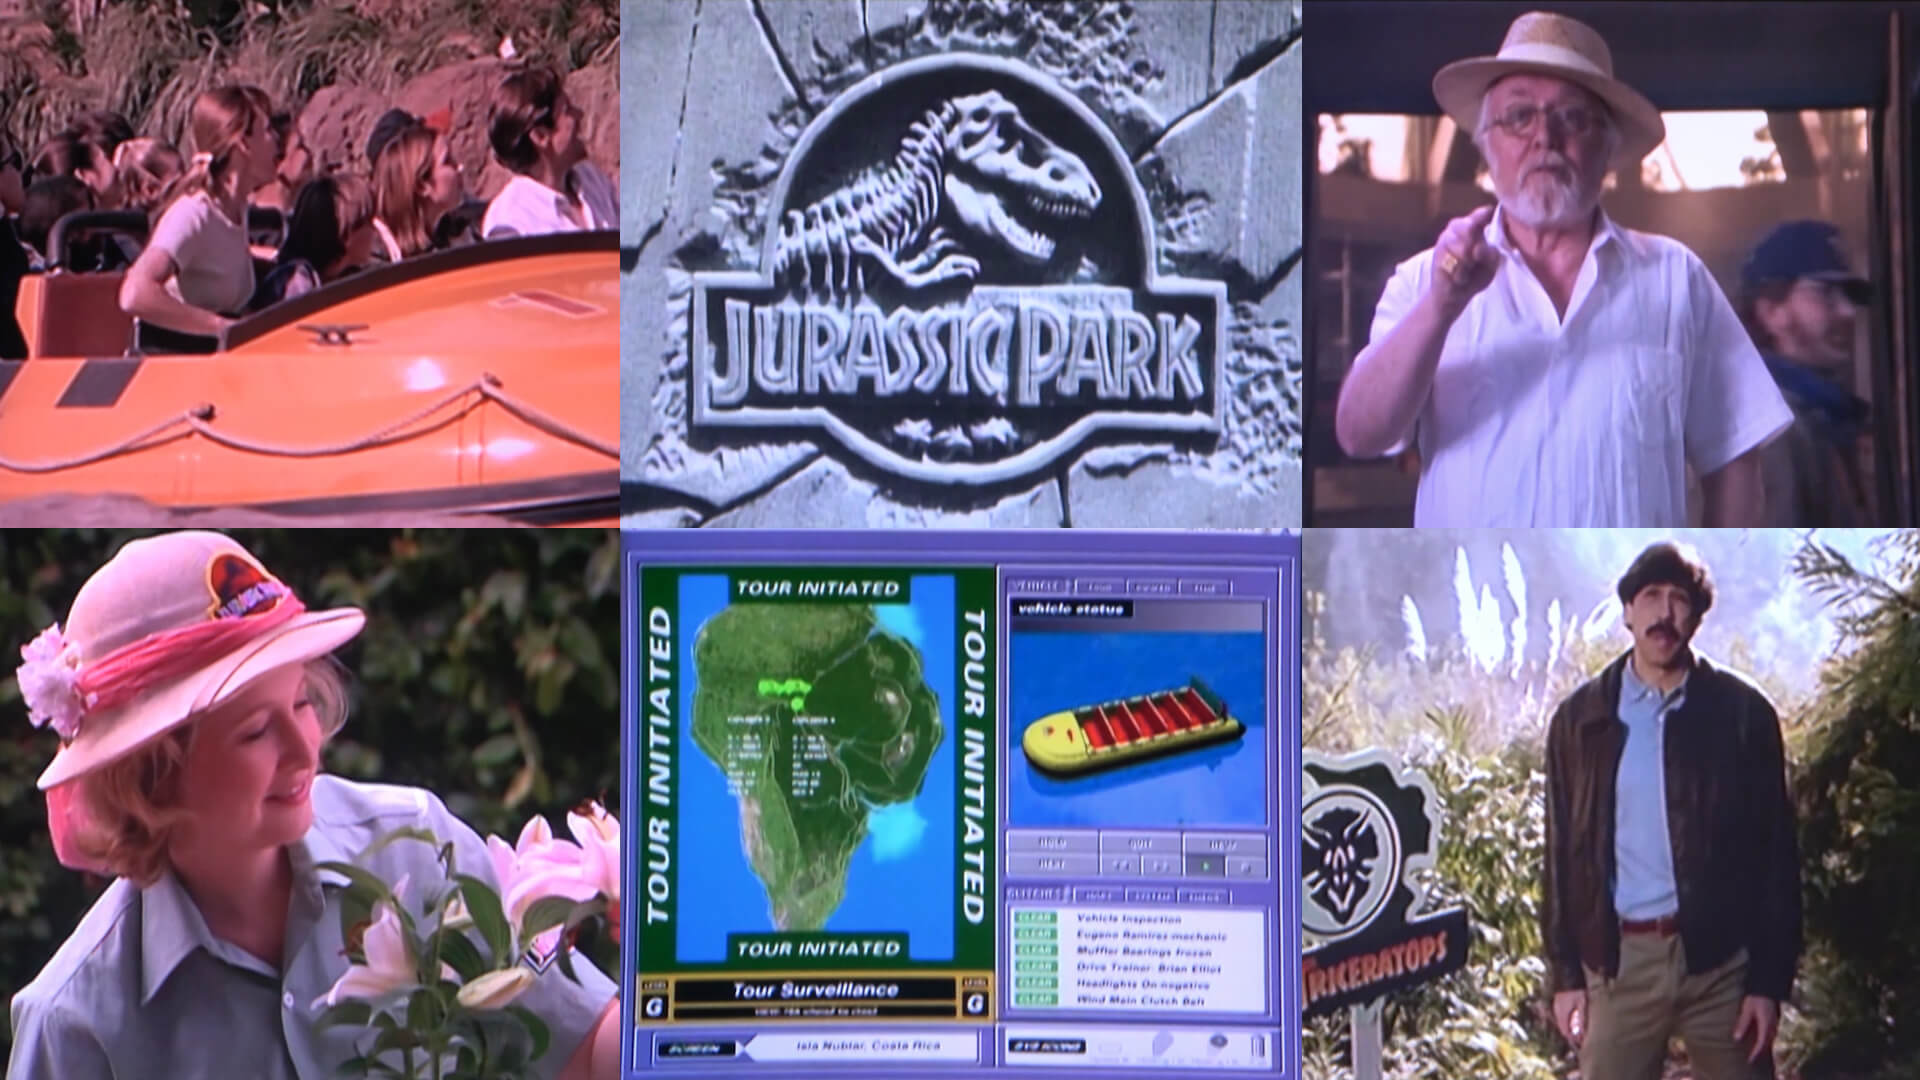 Queue Videos From Extinct ‘Jurassic Park: The Ride’ Hollywood Attraction Receives Newly-Remastered Presentation!